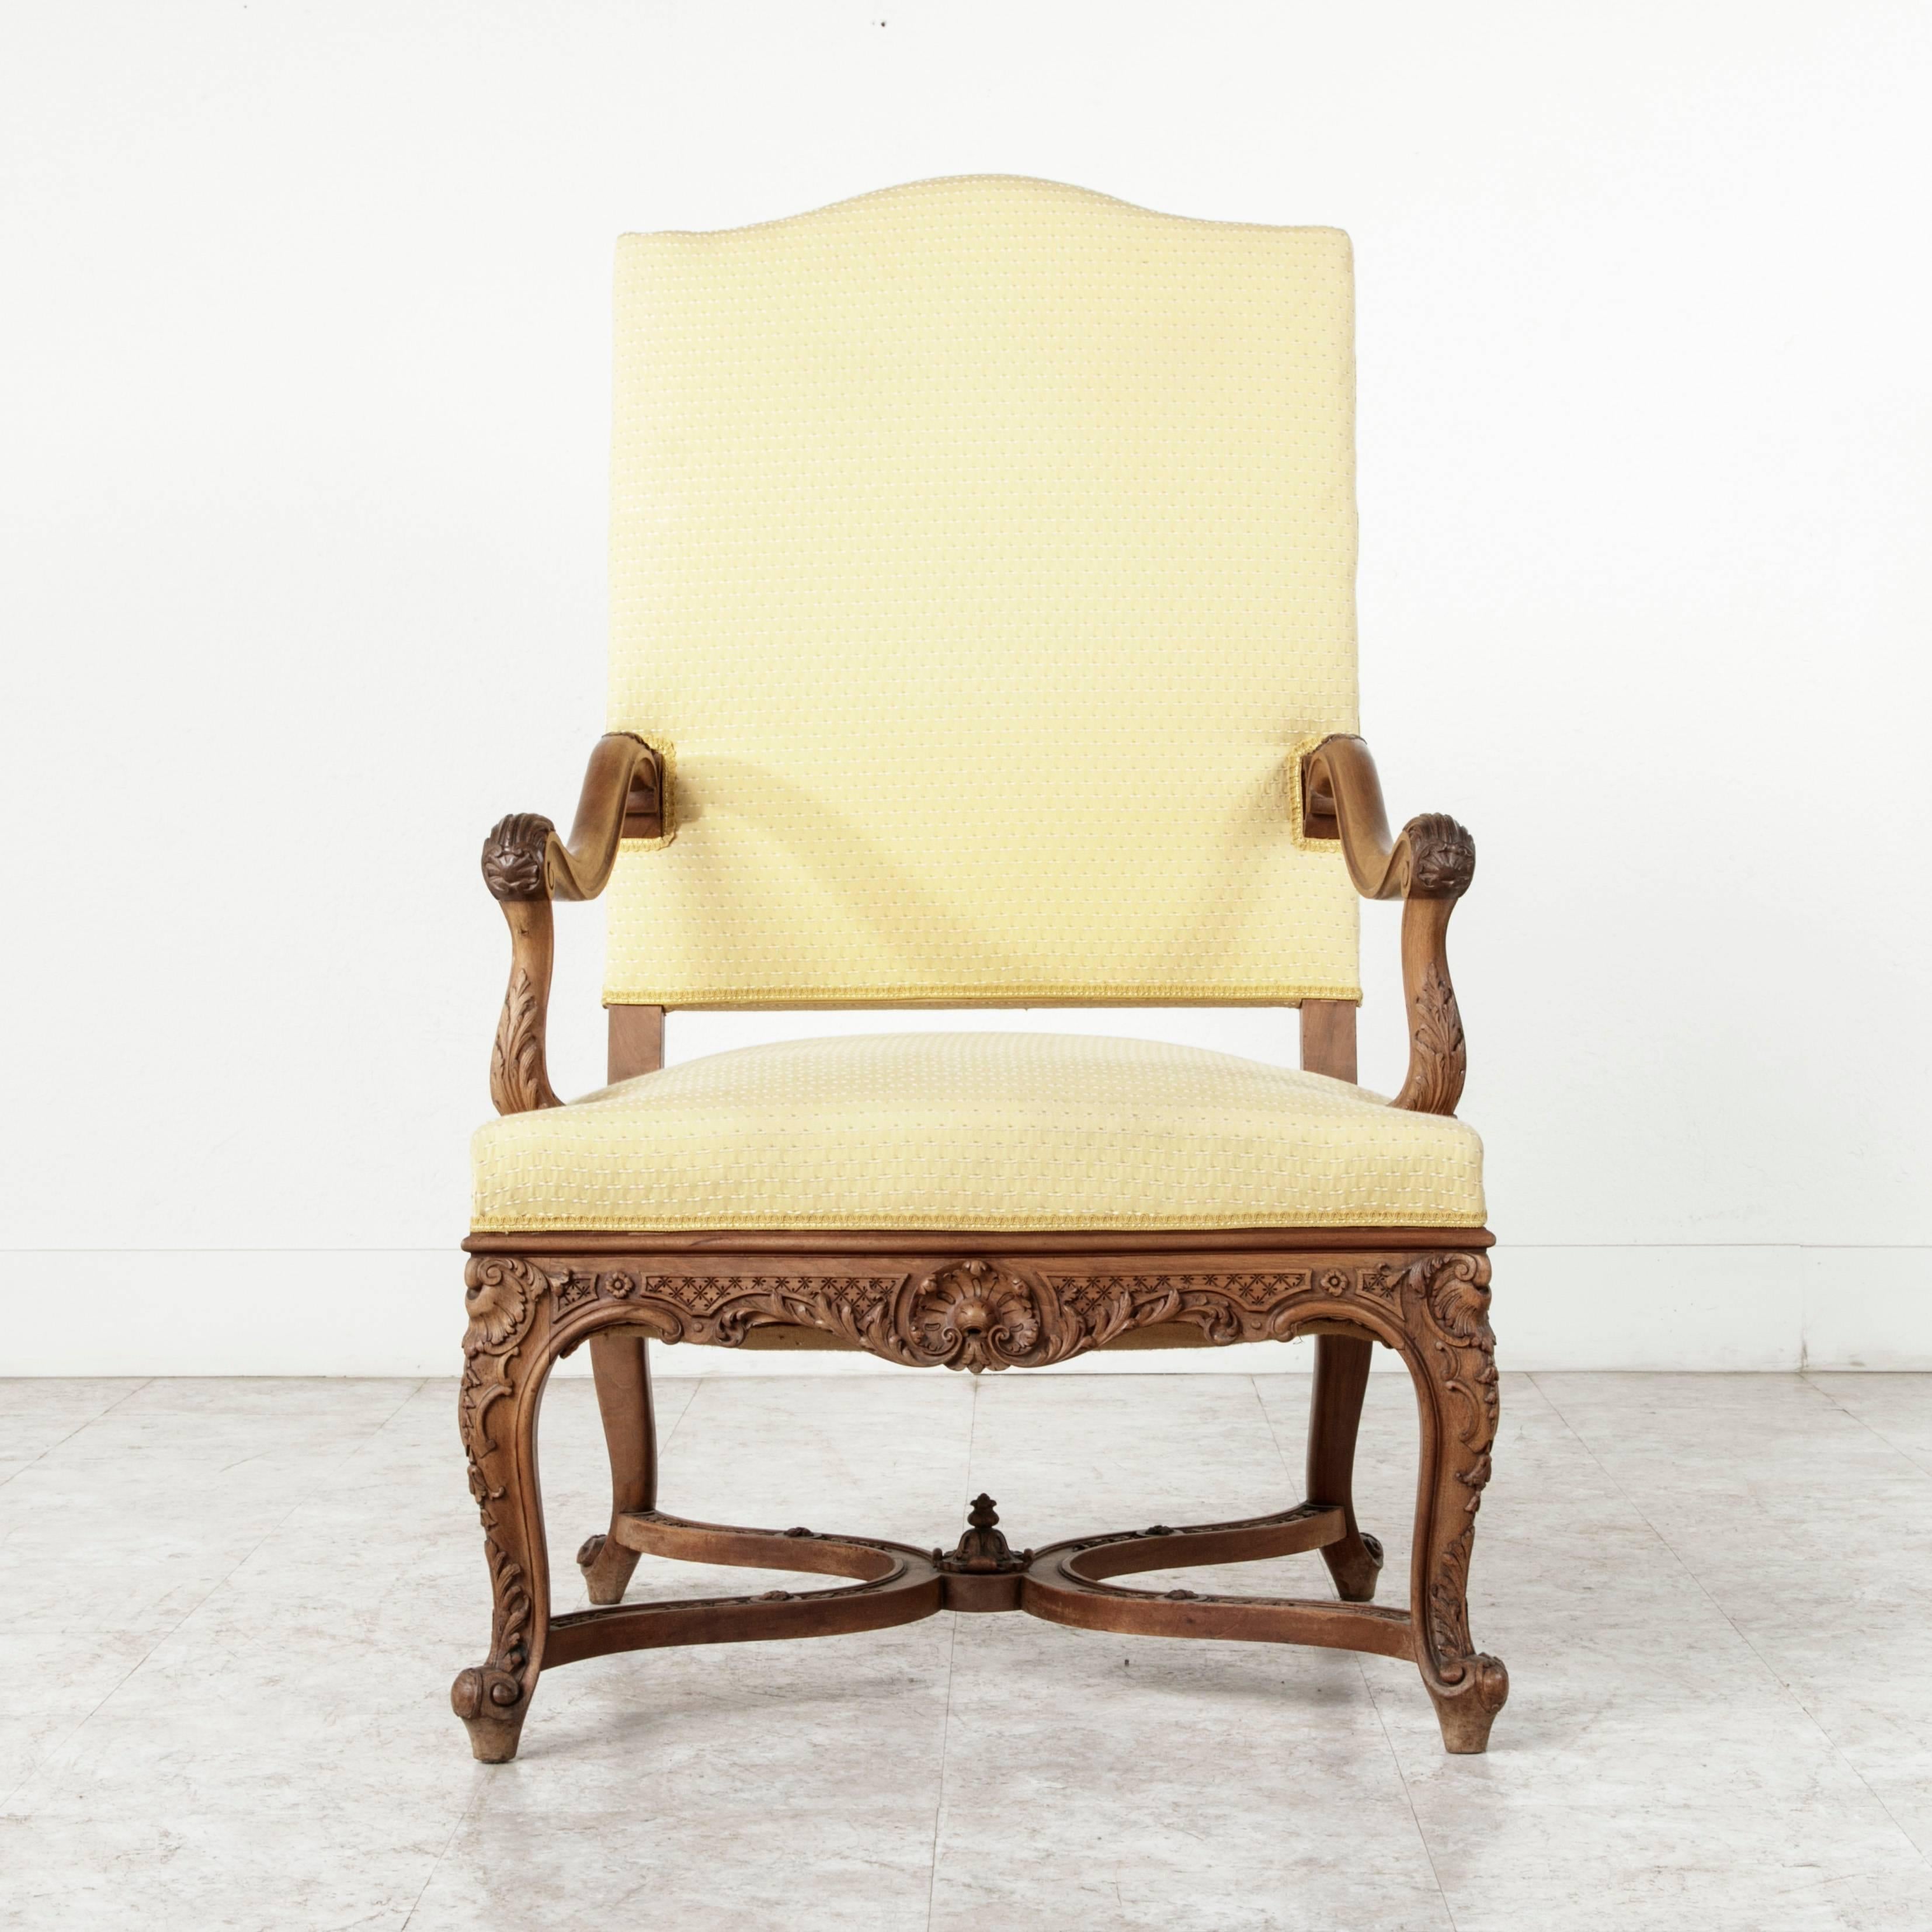 Régence Pair of Late 19th Century Large-Scale French Regency Style Hand-Carved Armchairs